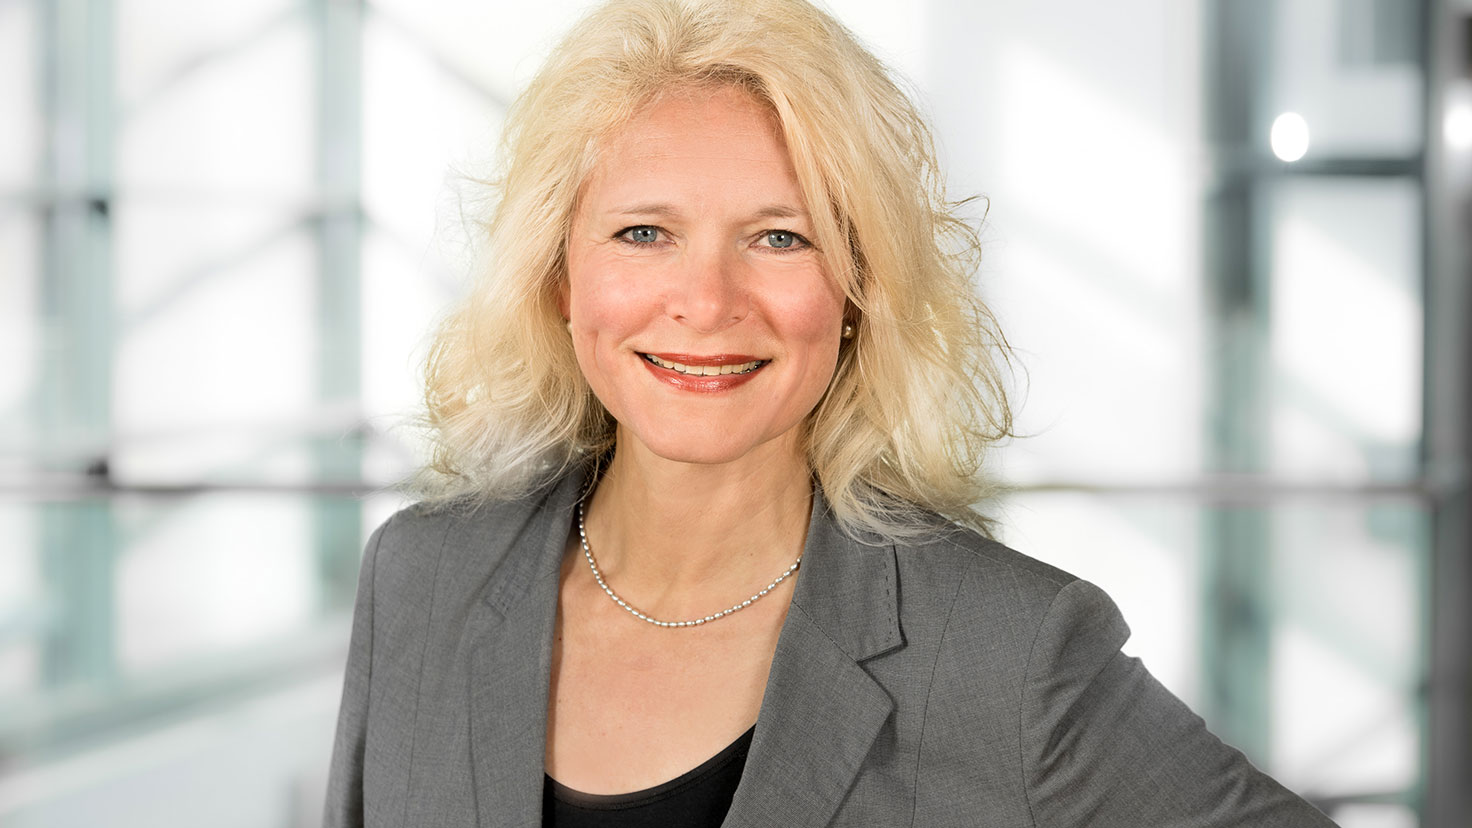 New head of the CCH – Congress Center Hamburg since March 1, 2018: Heike Mahmoud